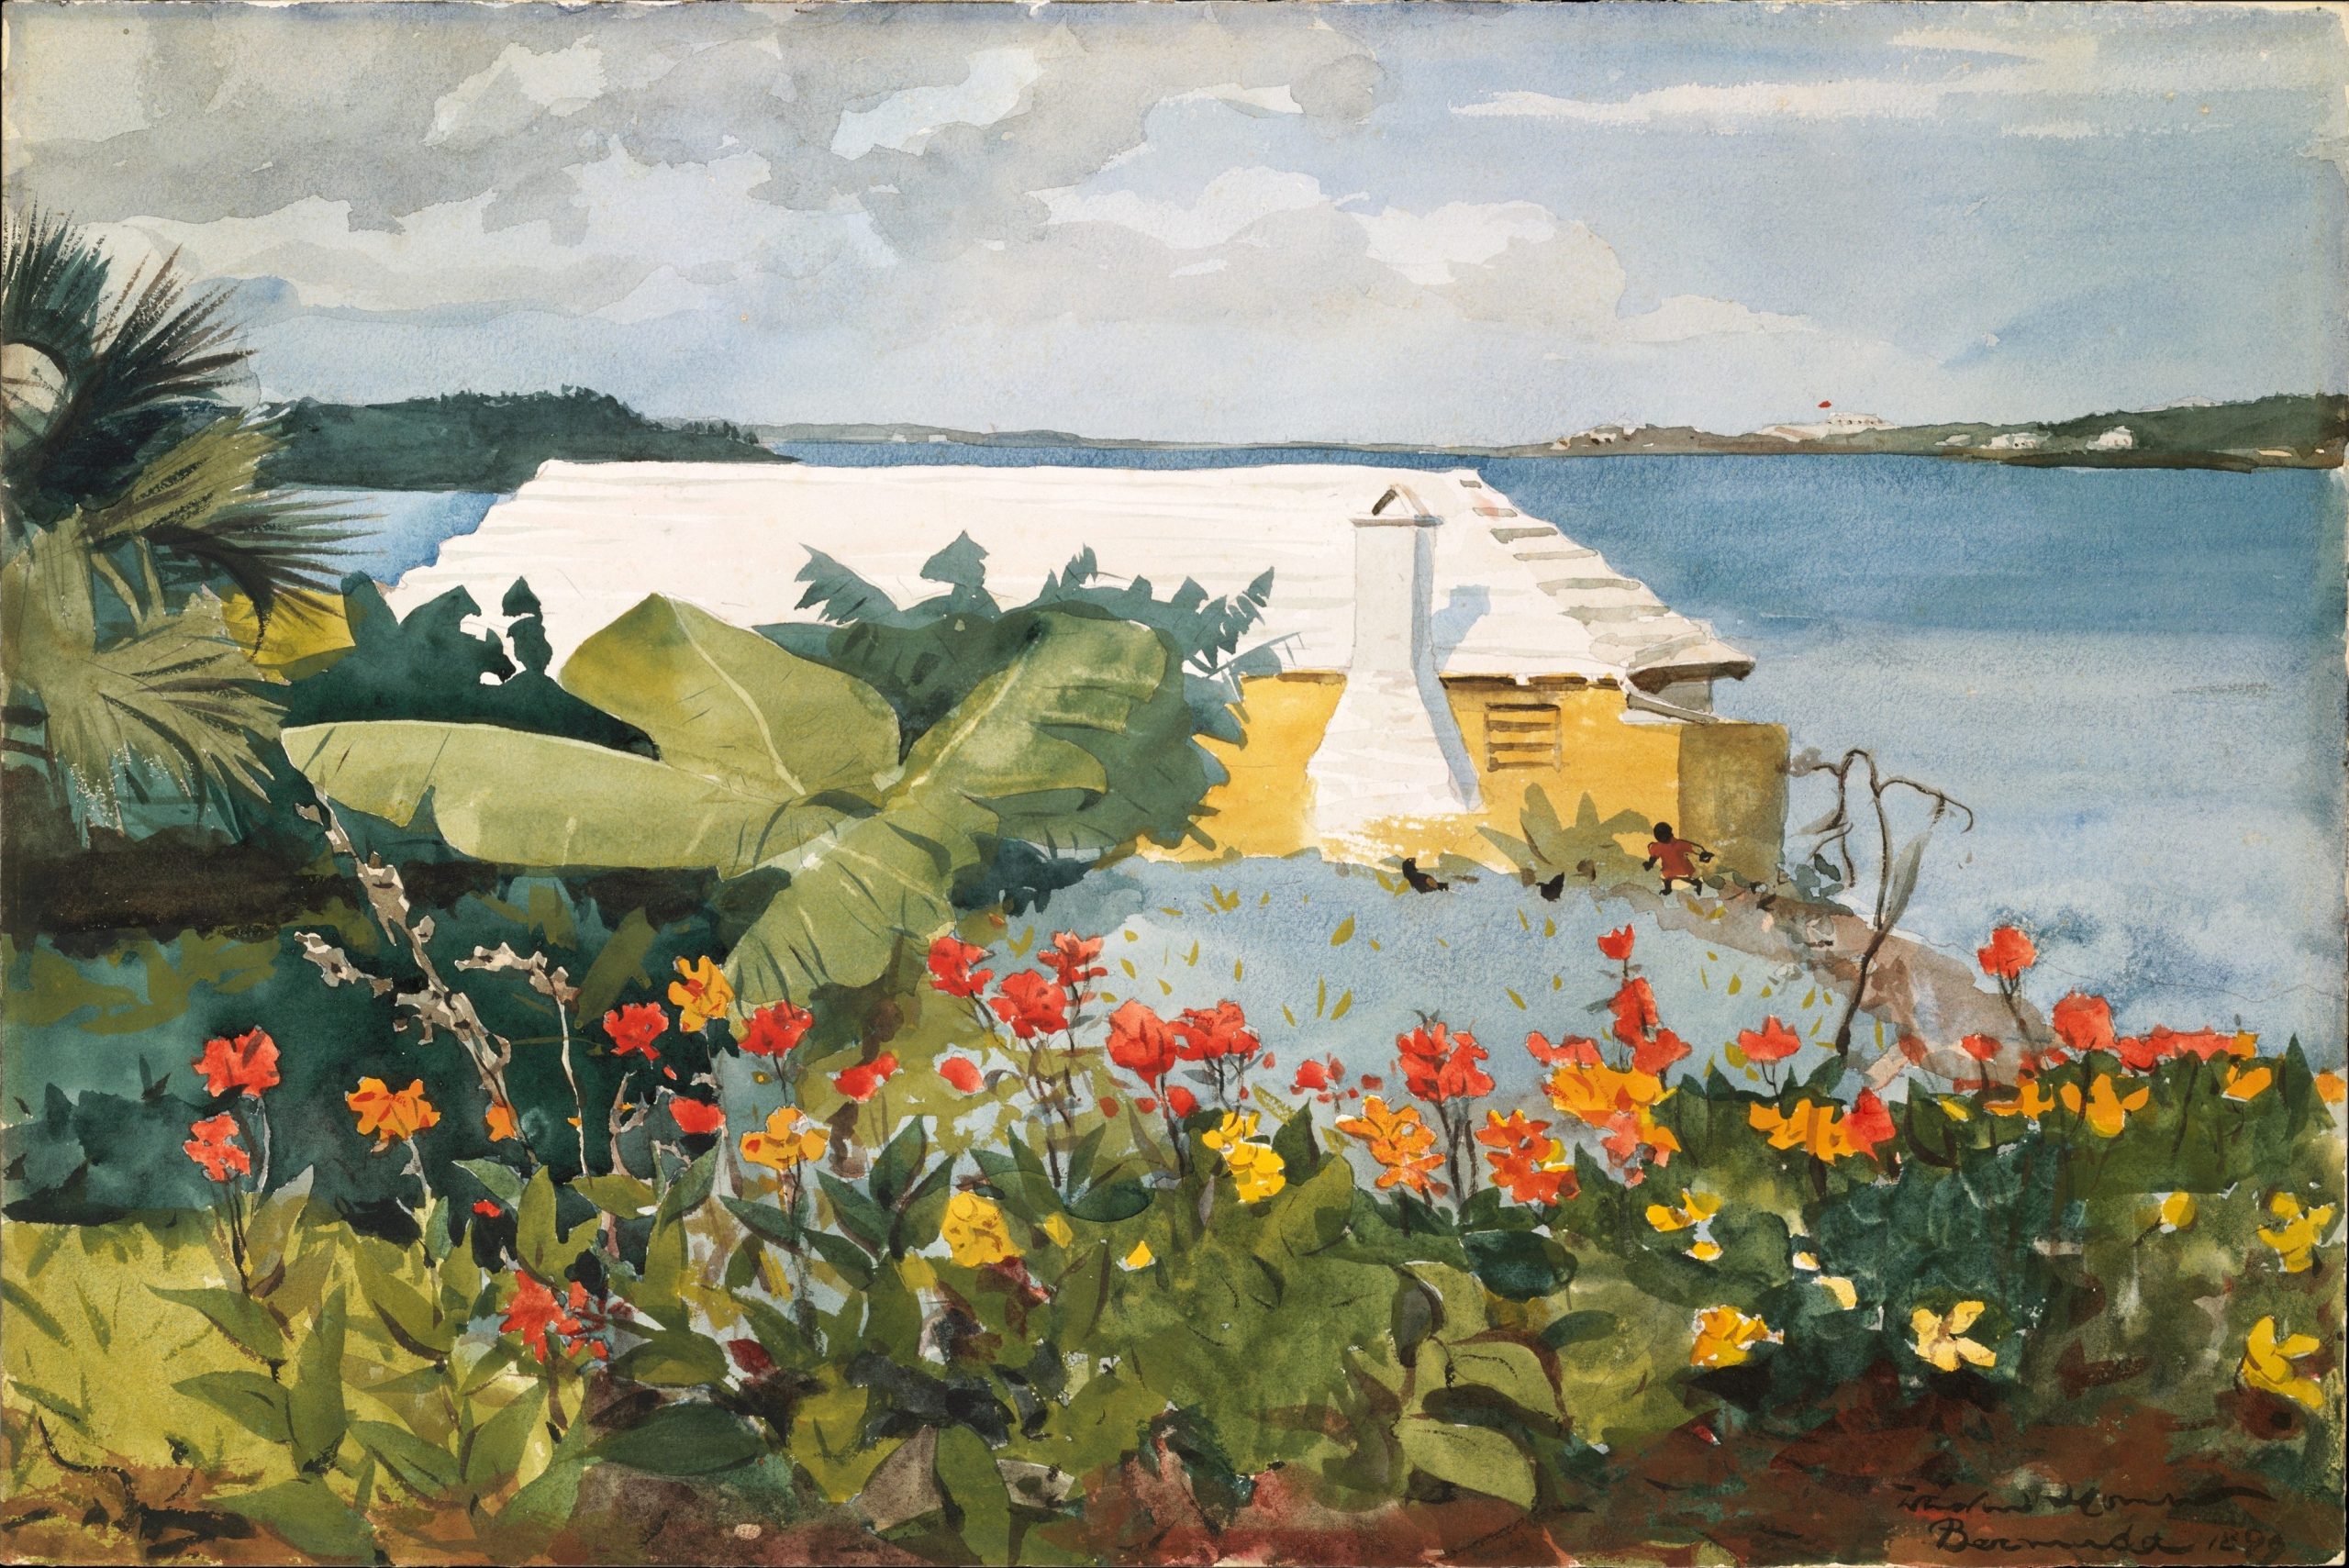 A flower garden in the foreground with a bungalow by the ocean in the background